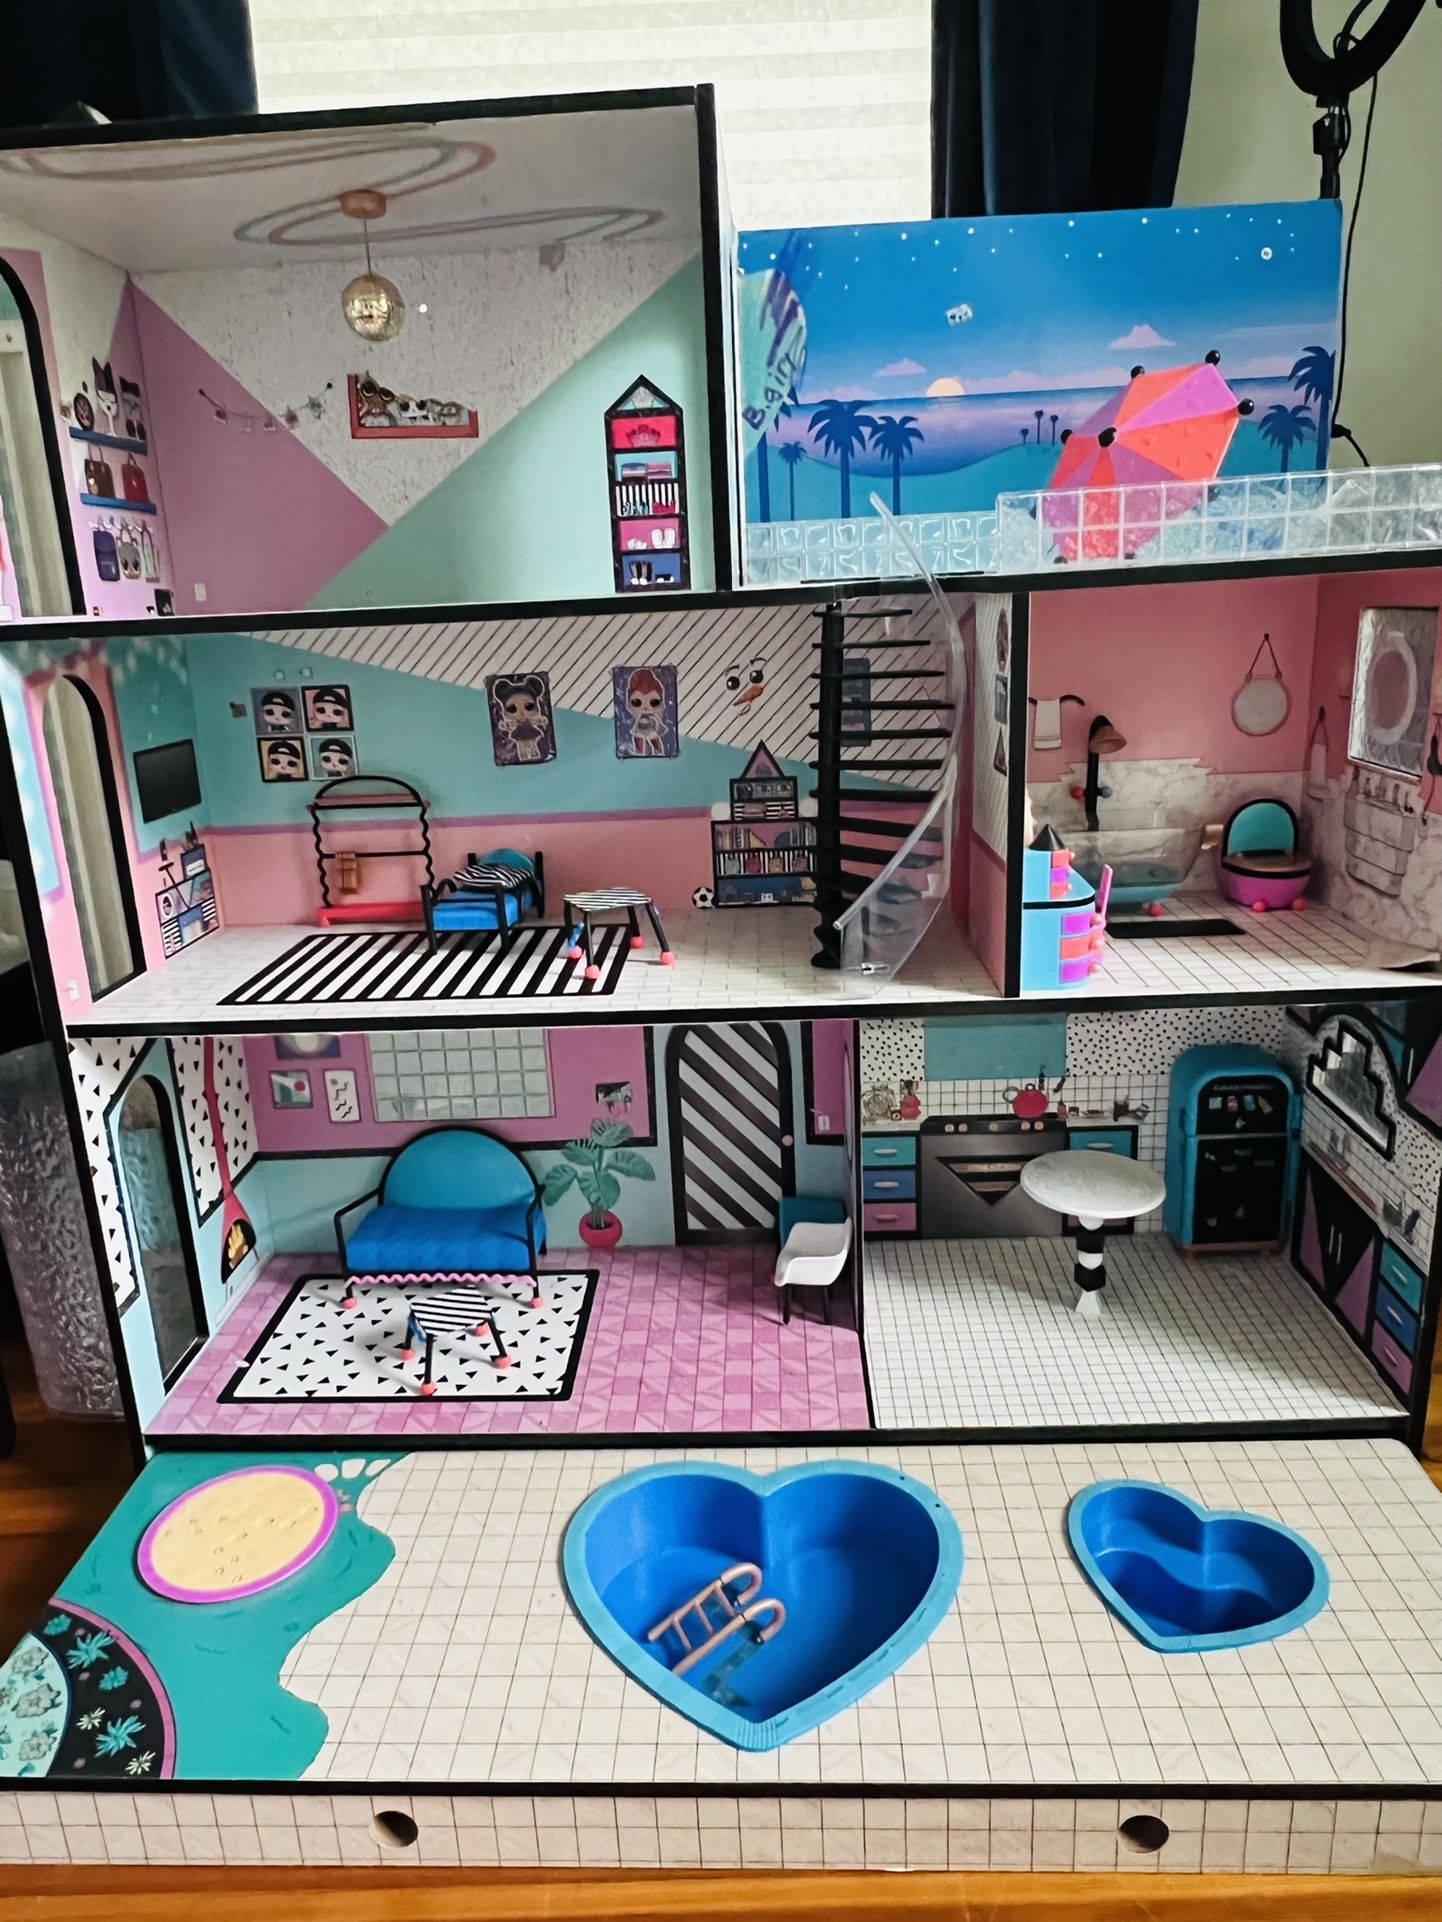 Large Doll House 